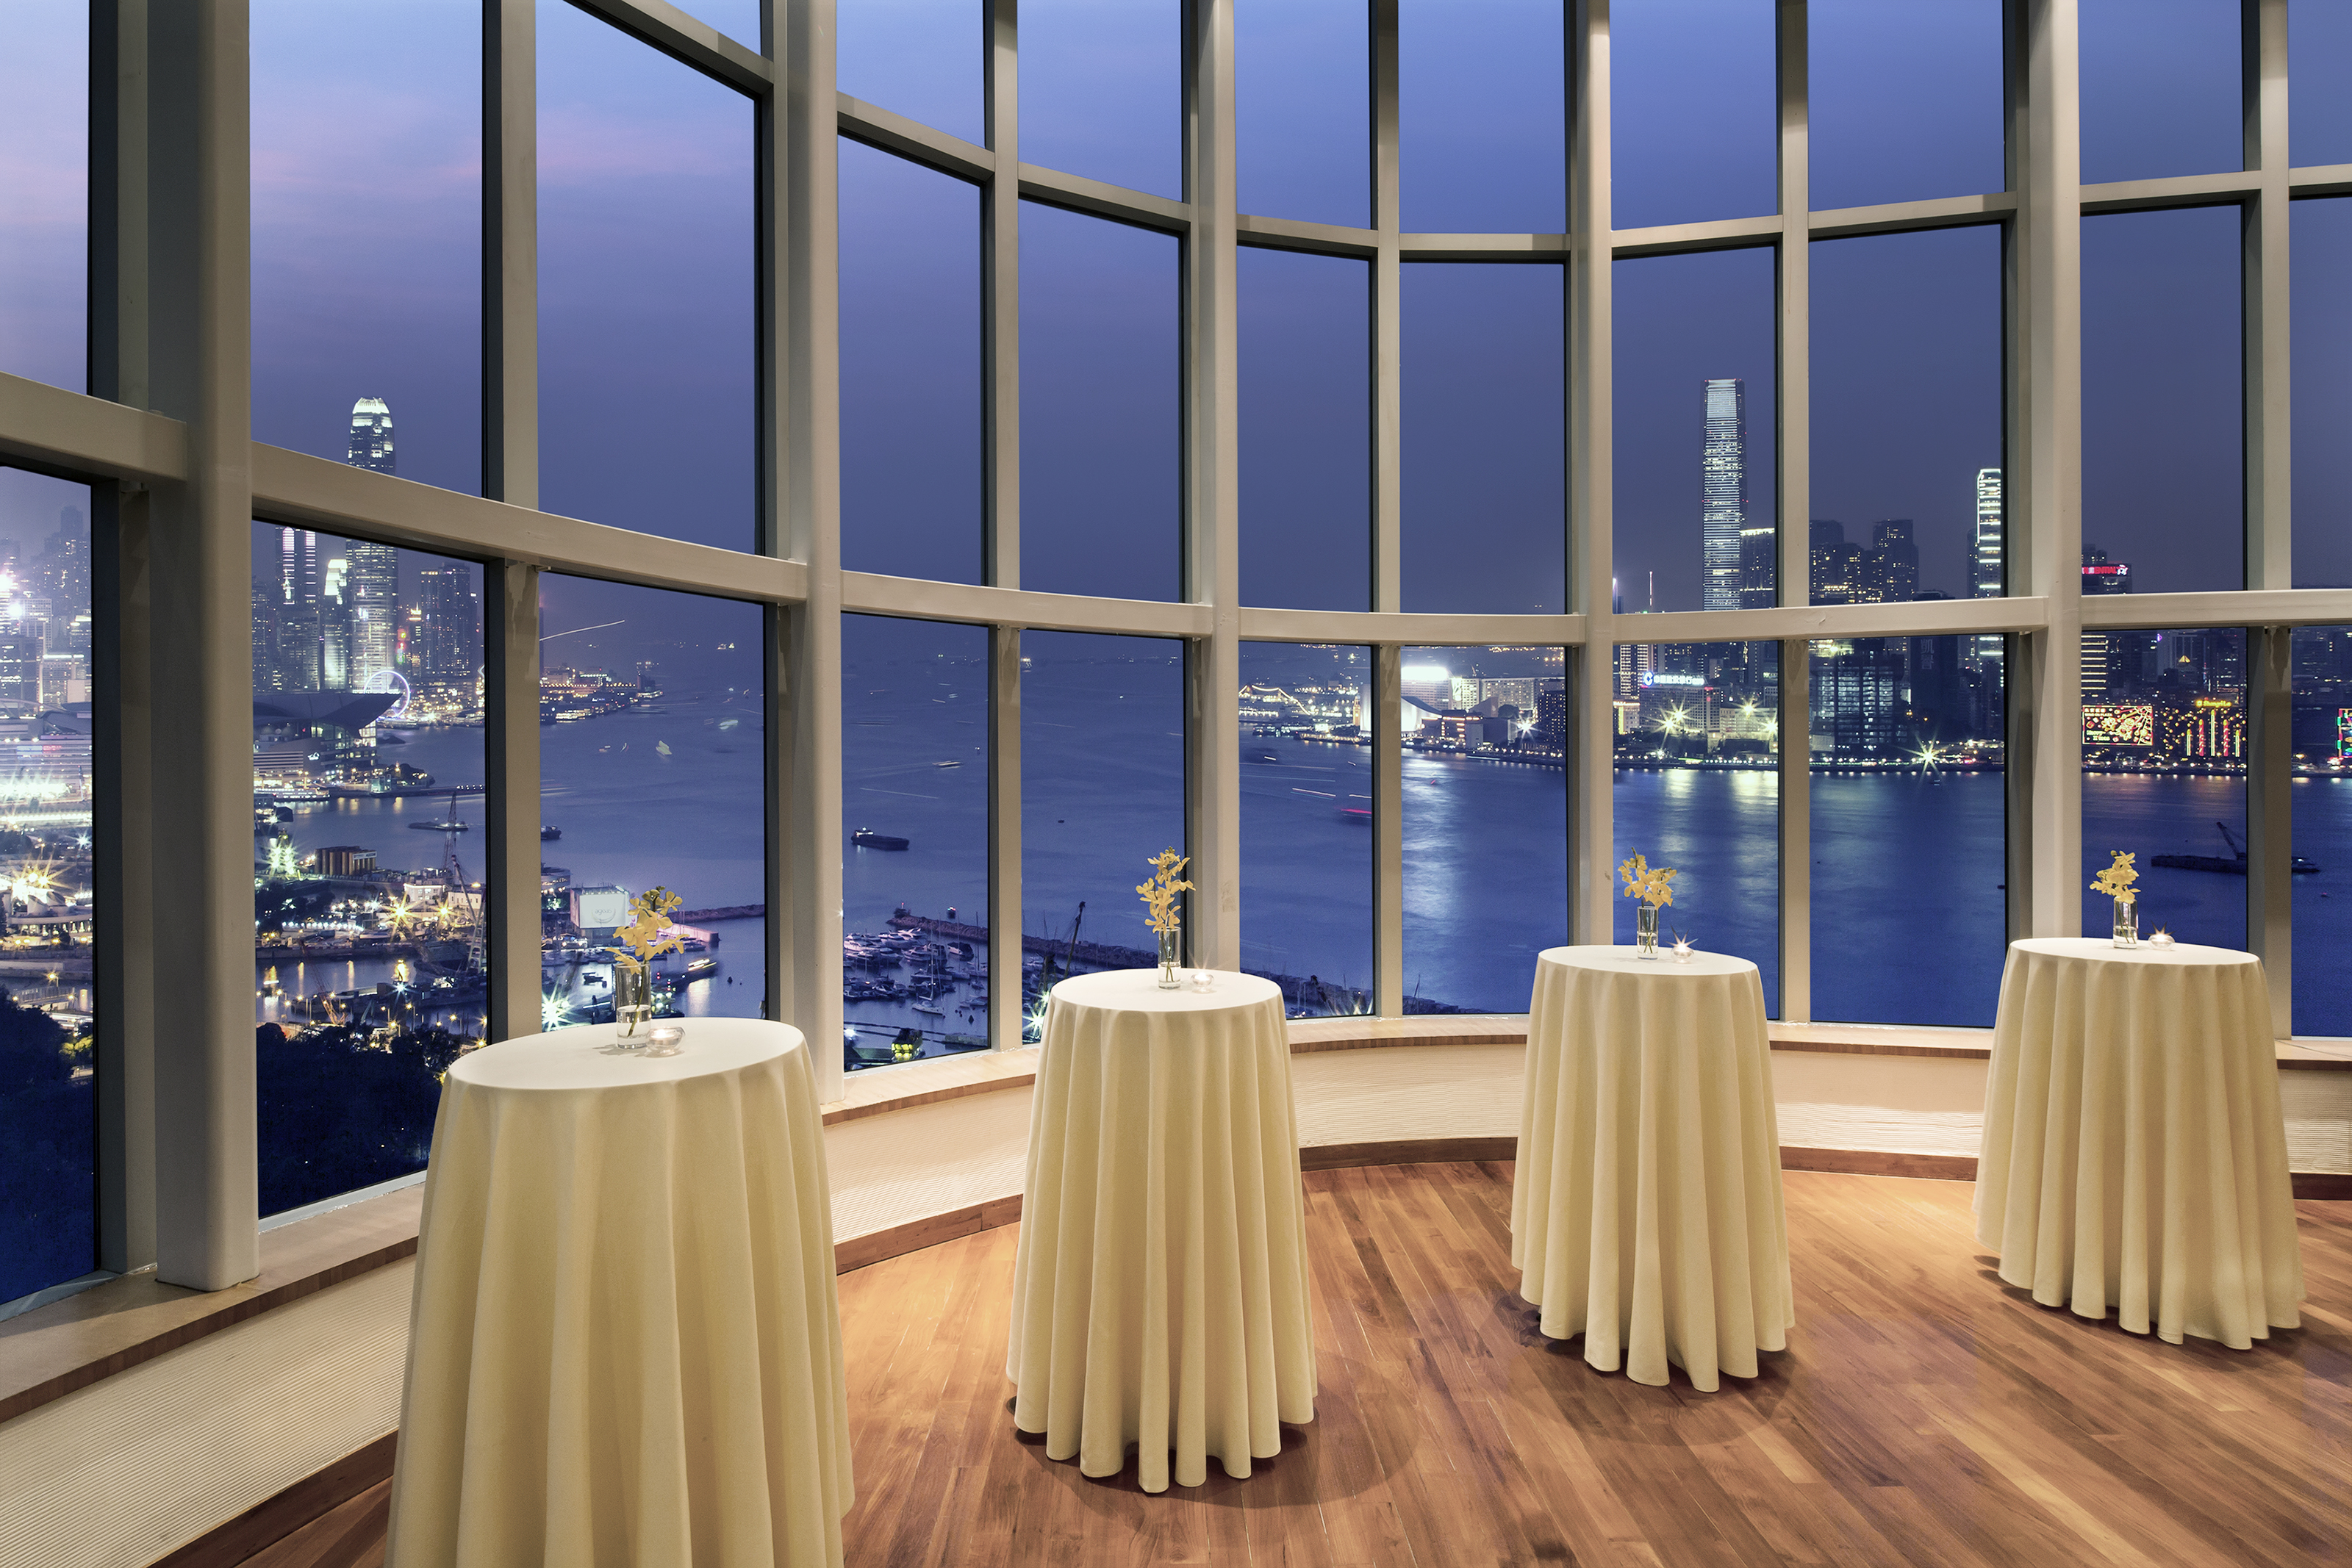 CWB Harbour View_Events_The Penthouse_Executive Lounge_Night Harbour View (final)_CWB3385_re